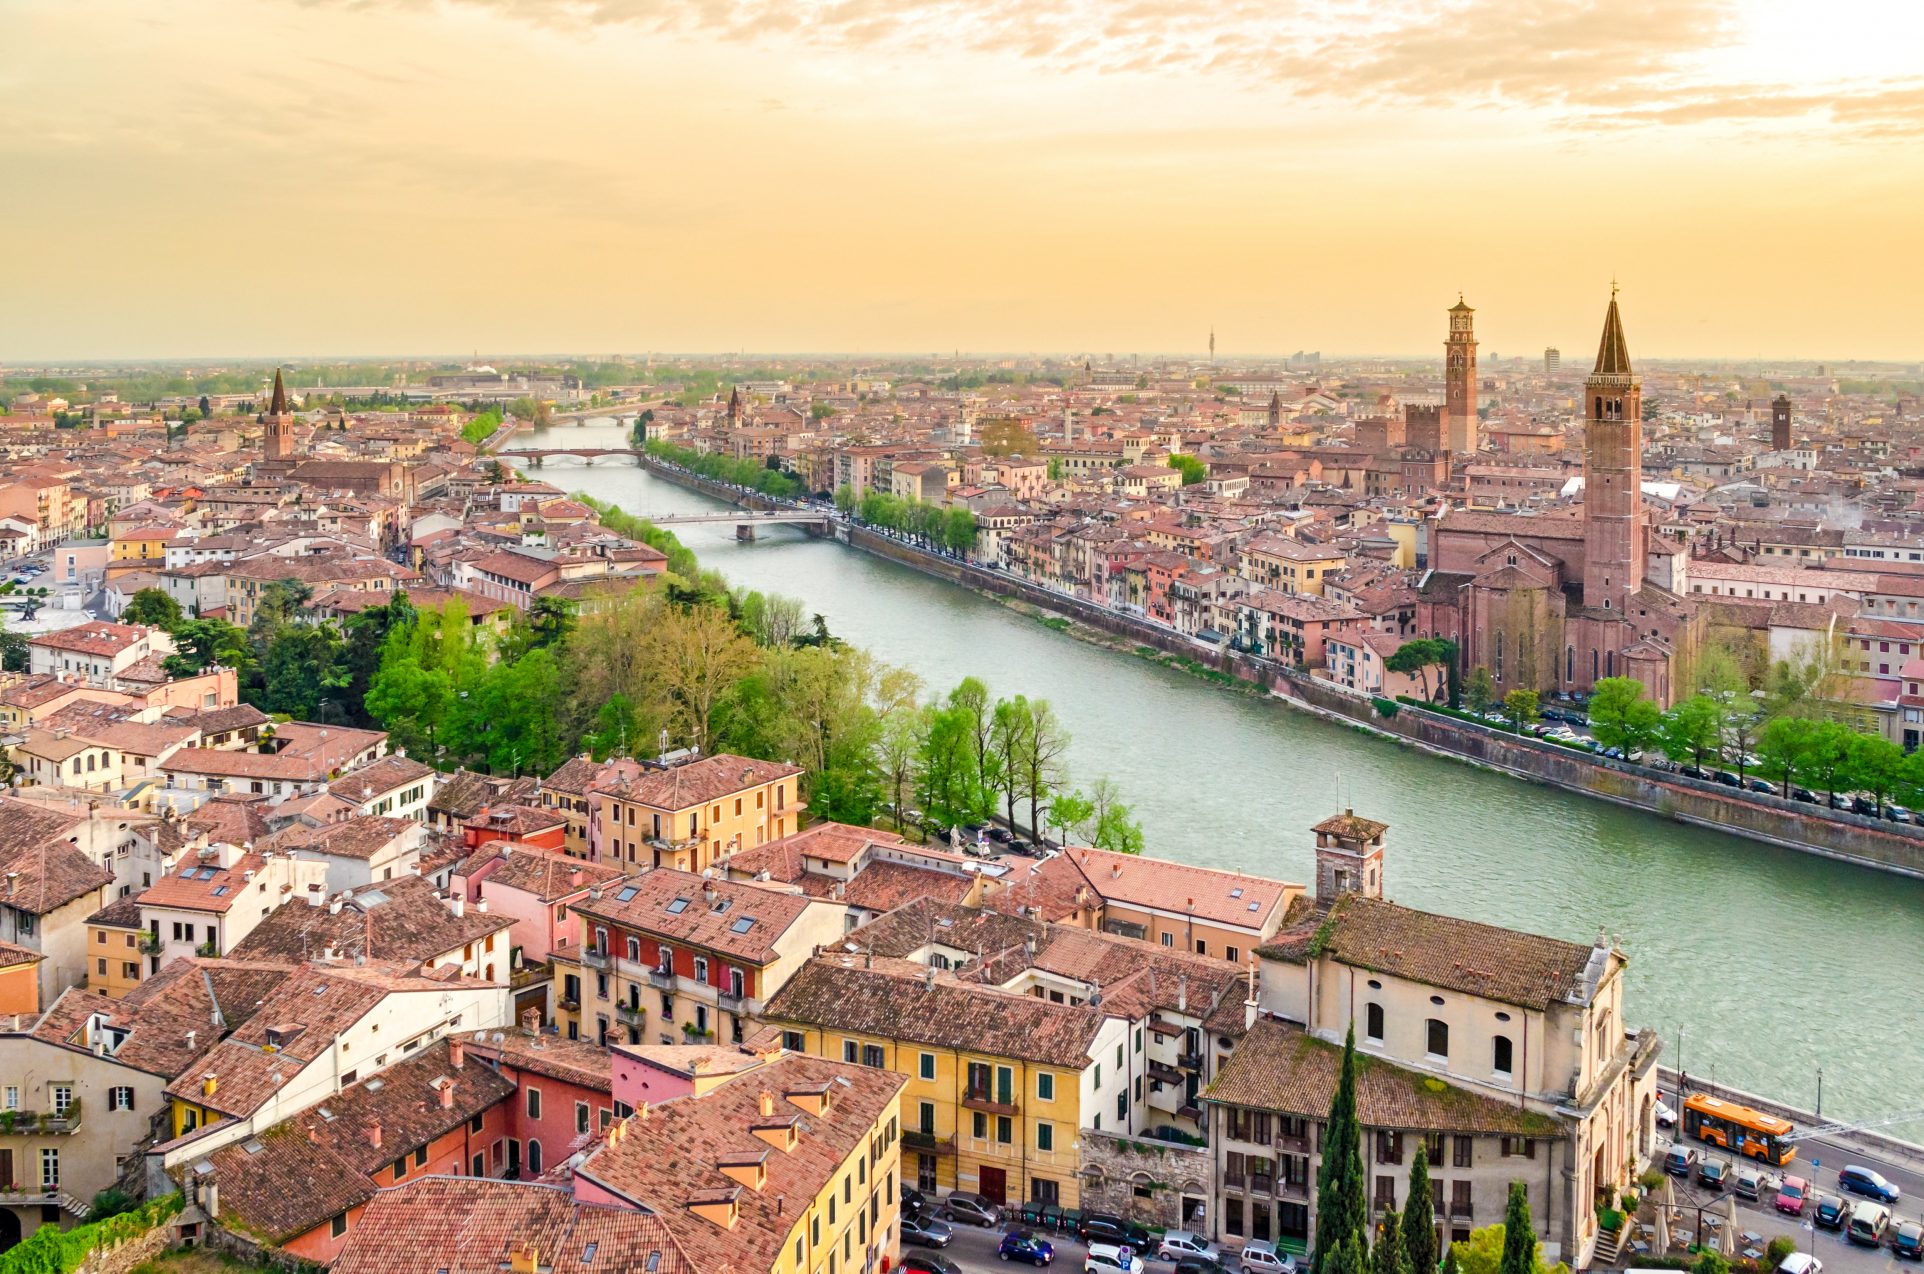 Verona, italy, Romeo and Juliet, Shakespear, history in italy, city tour, private trip with locals